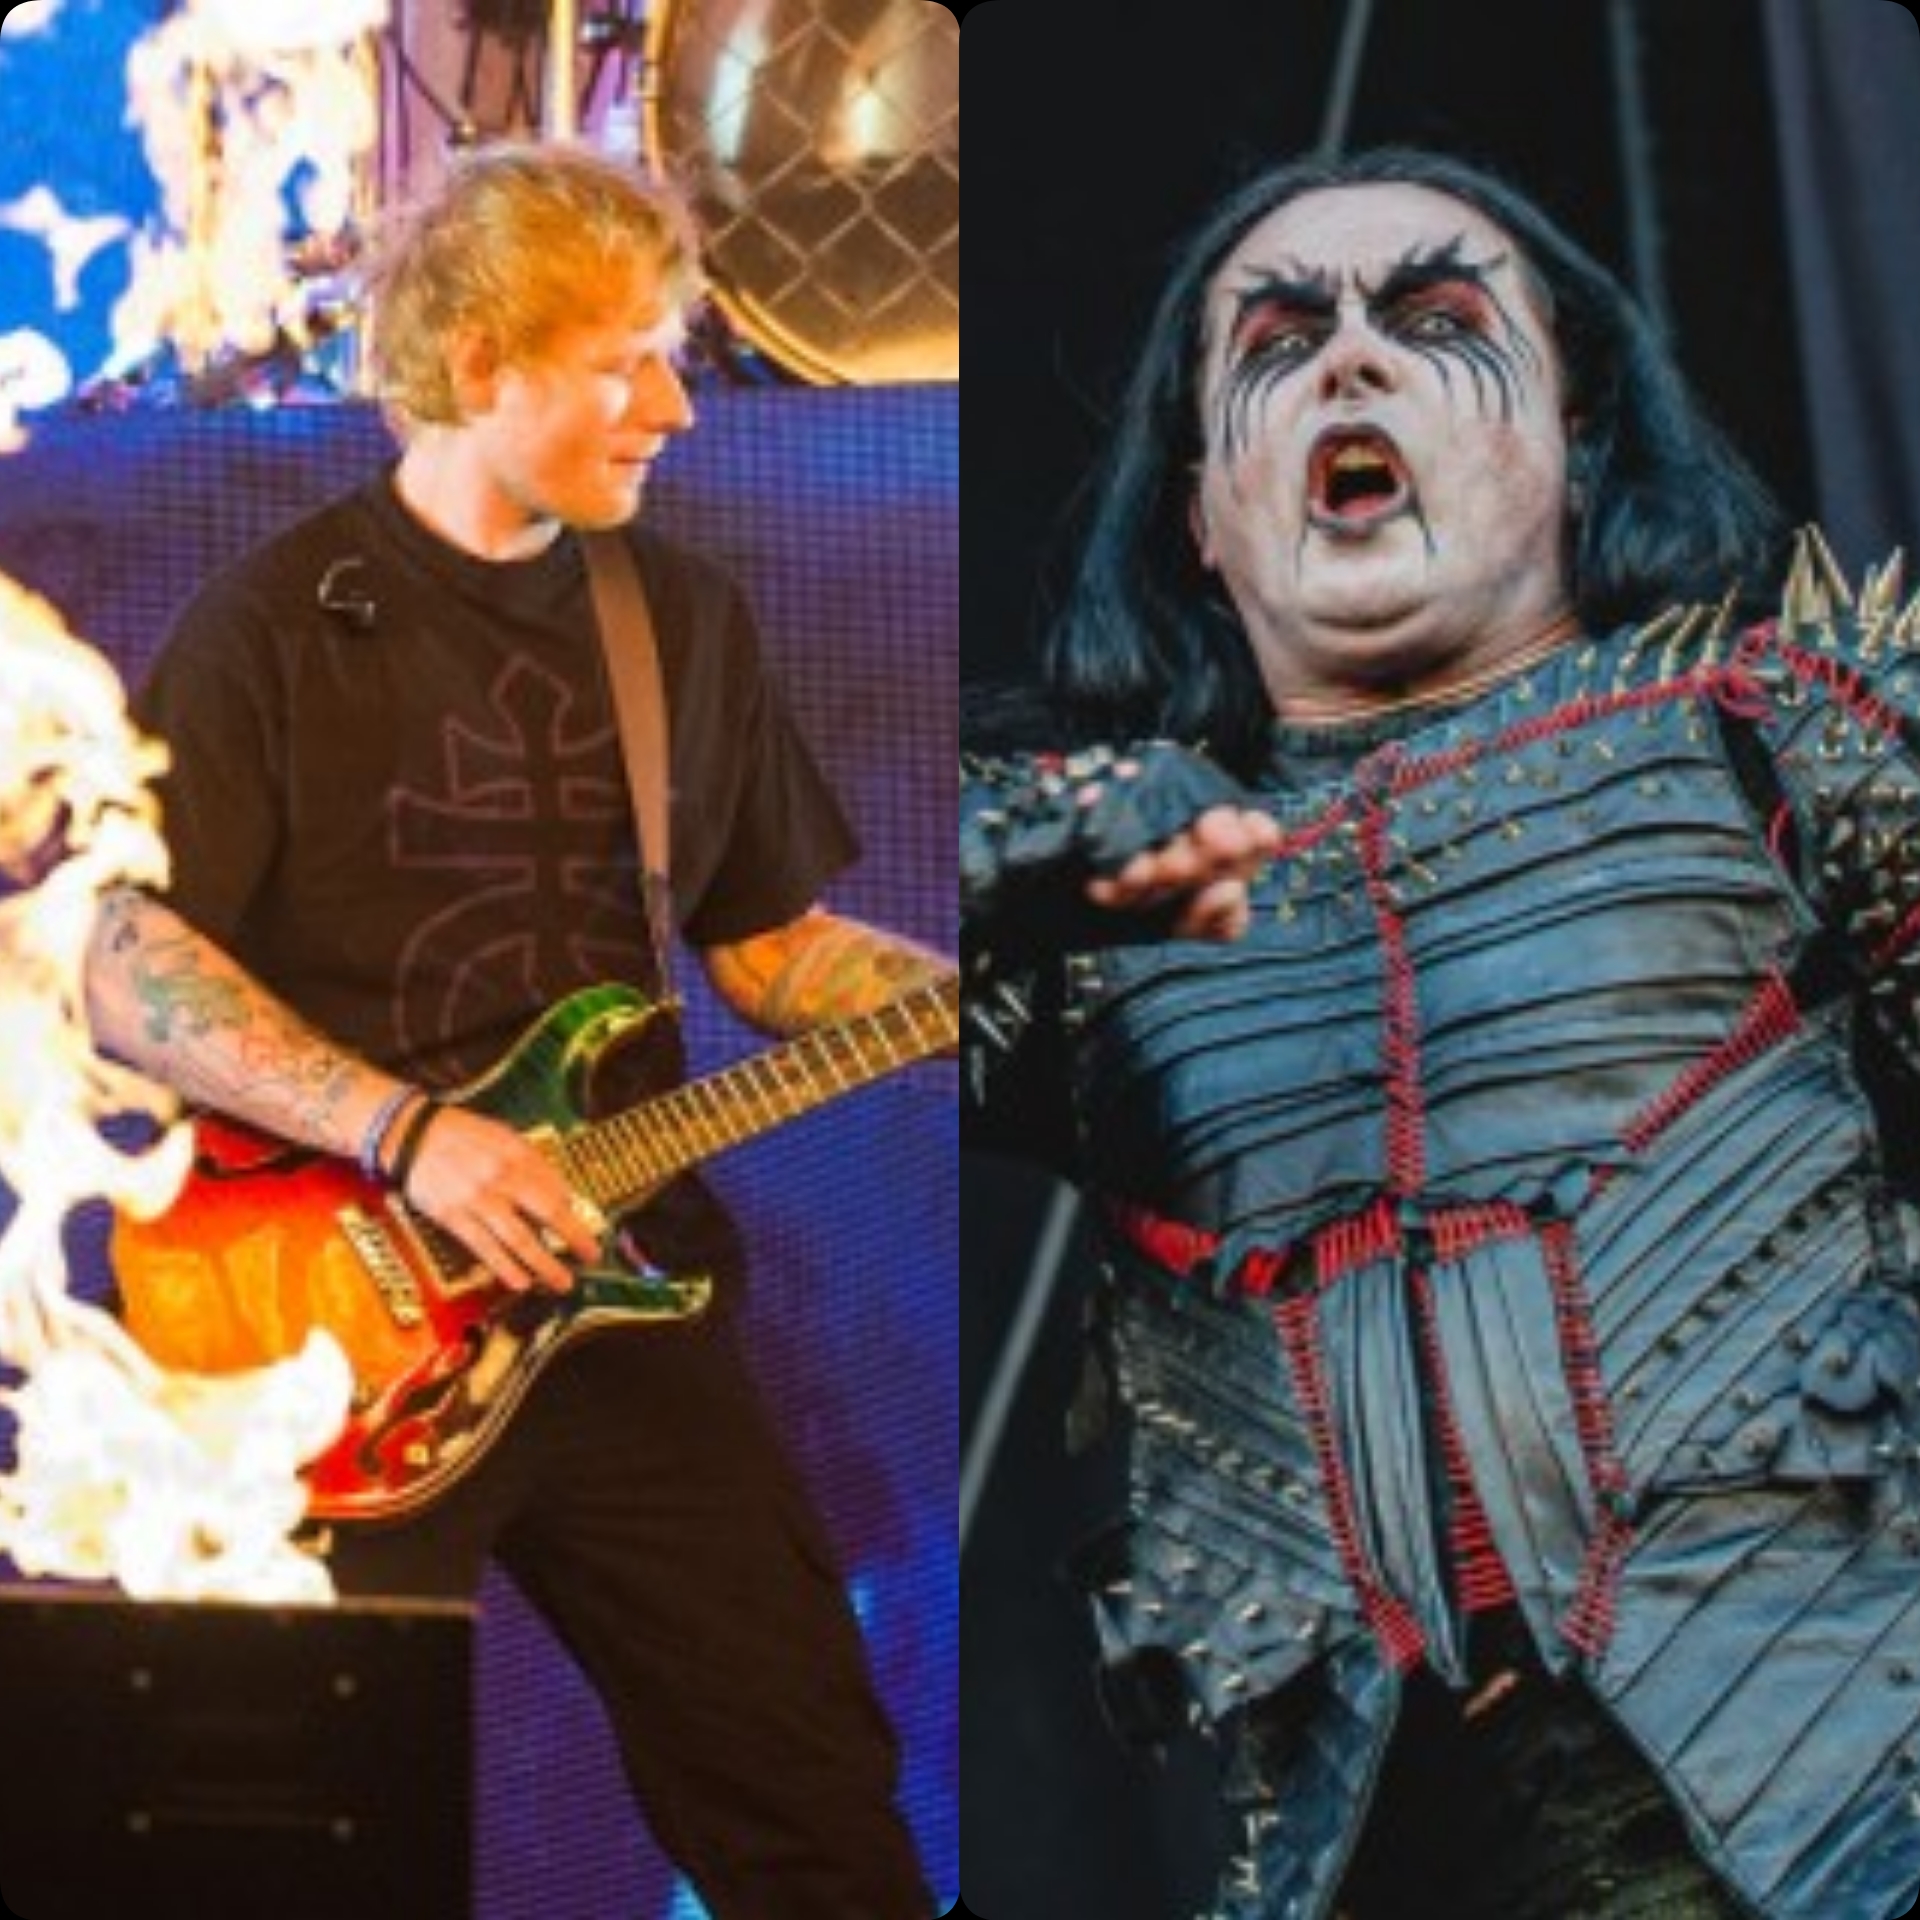 Ed Sheeran to team up with metal icons Cradle Of Filth to work on new music